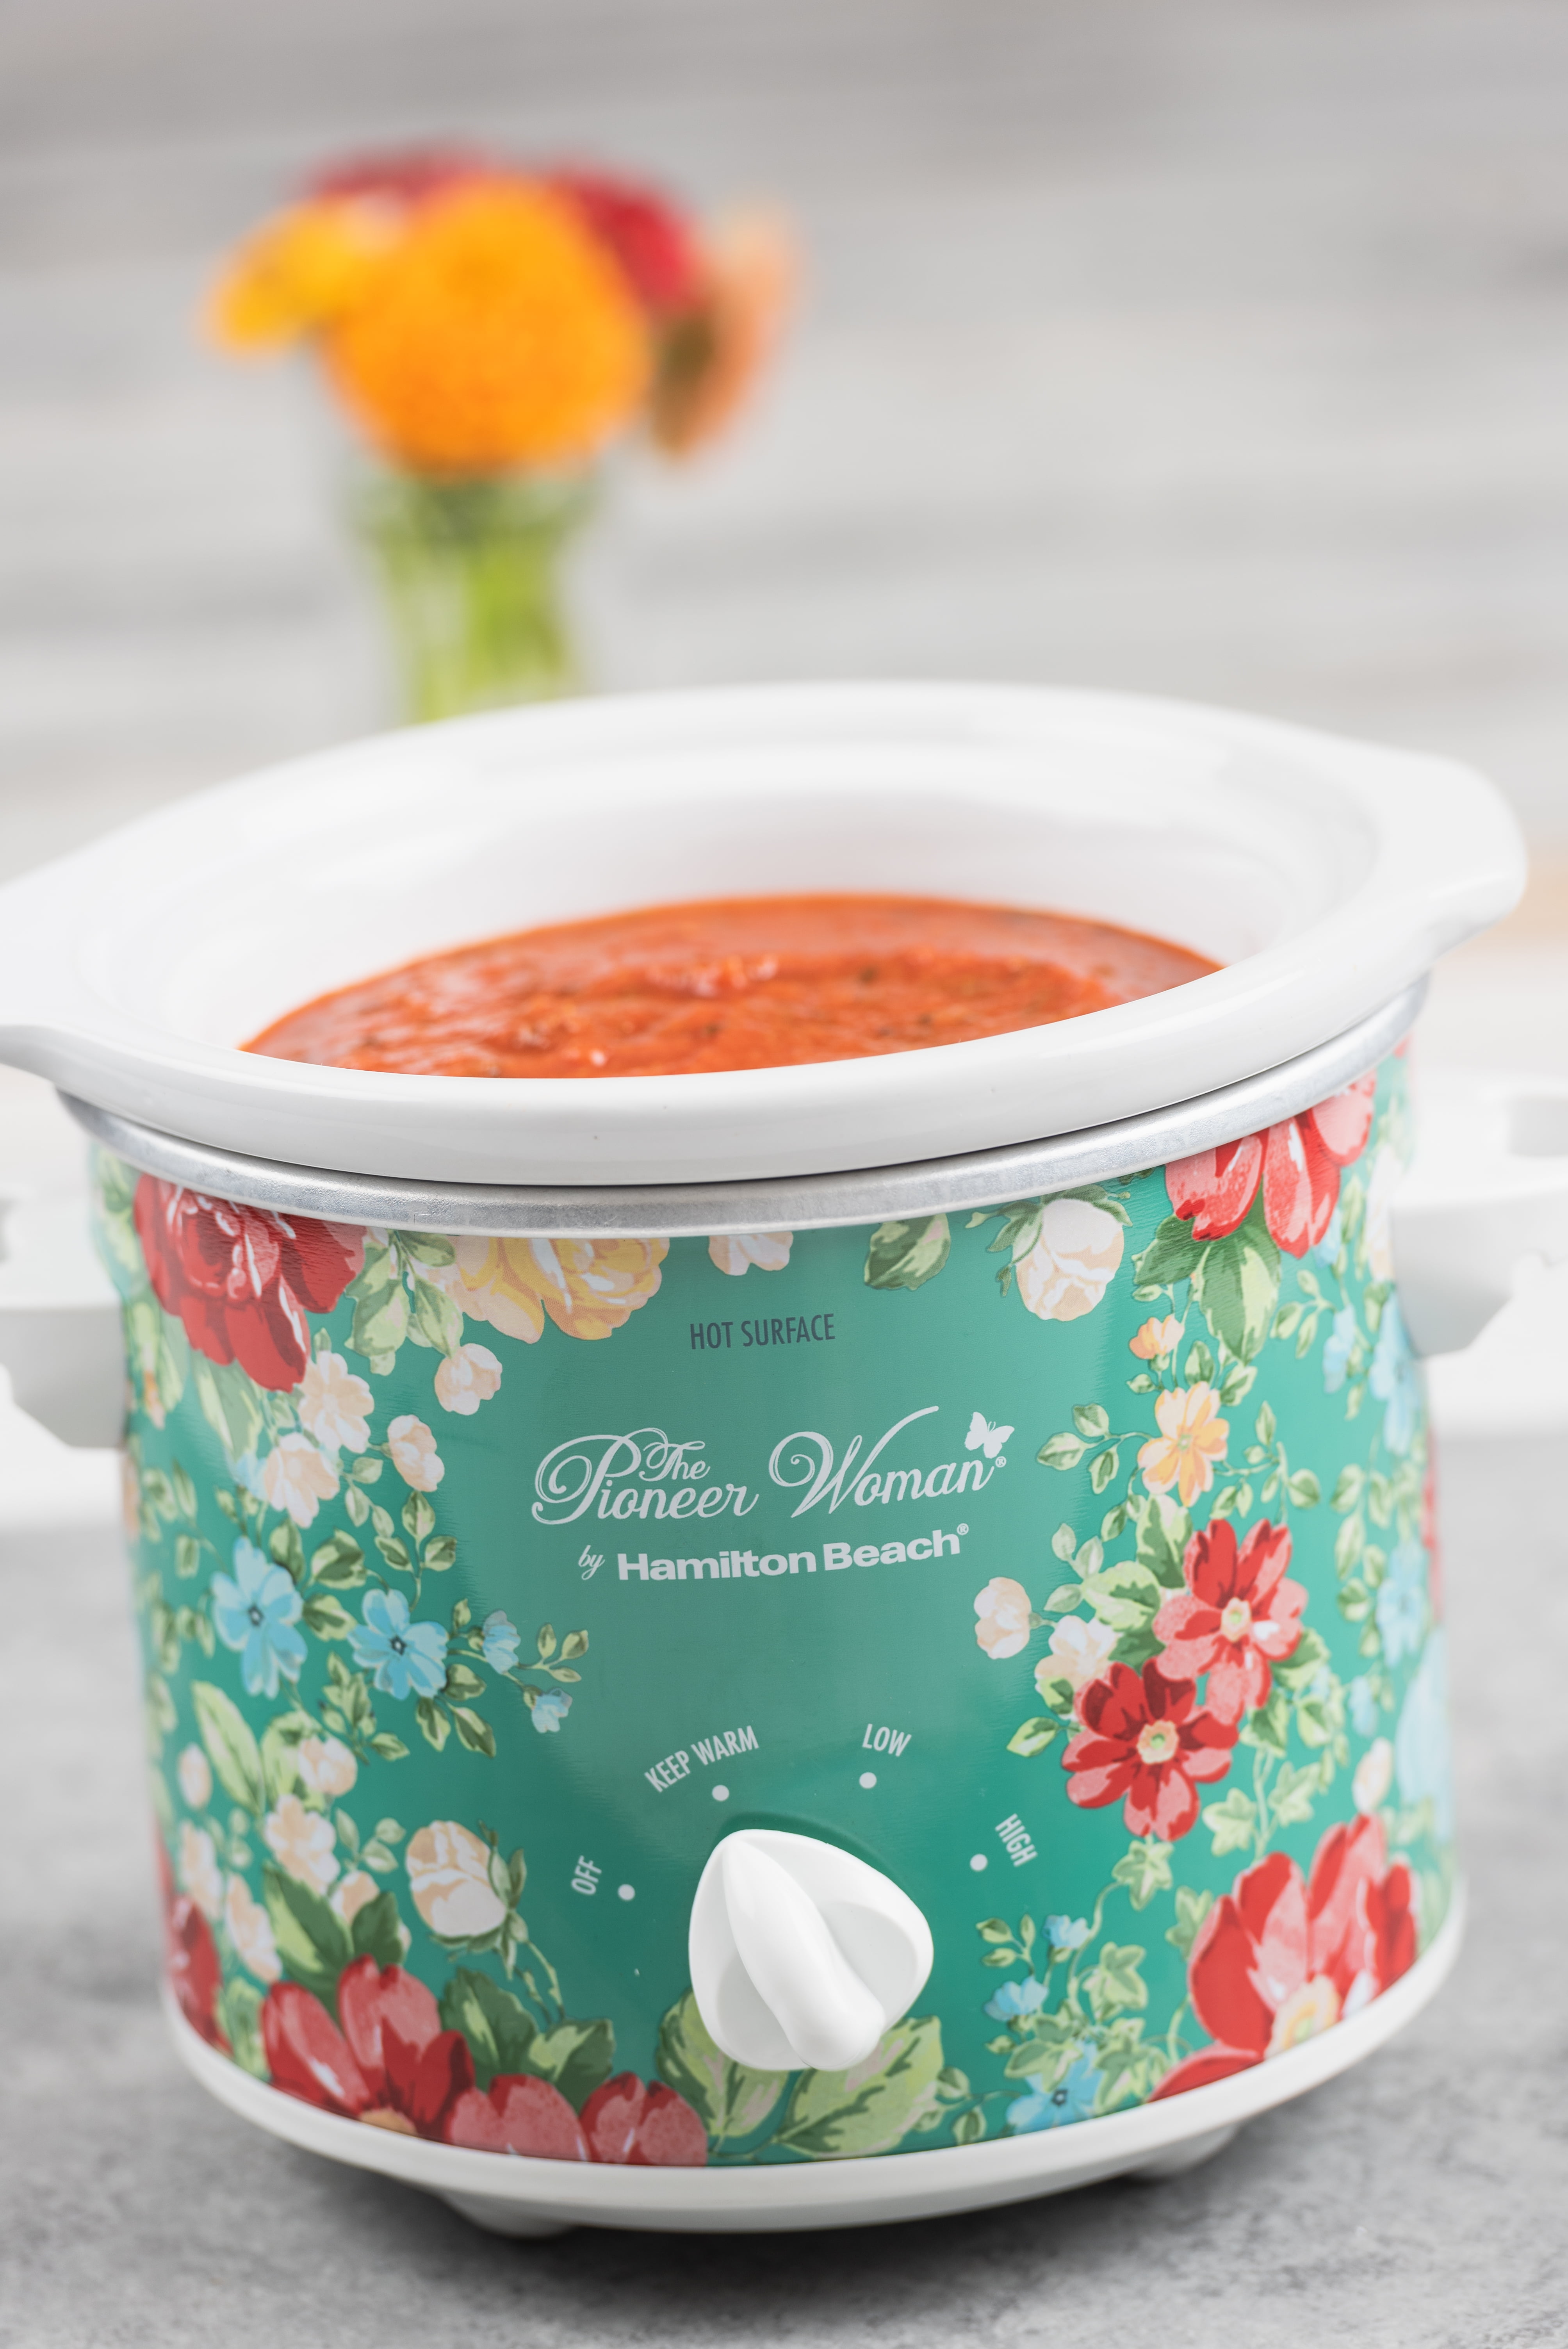 The Pioneer Woman - Ree Drummond - Be still my heart! This is one of the  sets of PW cookware that will be in Walmart stores on Black Friday  (actually, Thursday evening!)